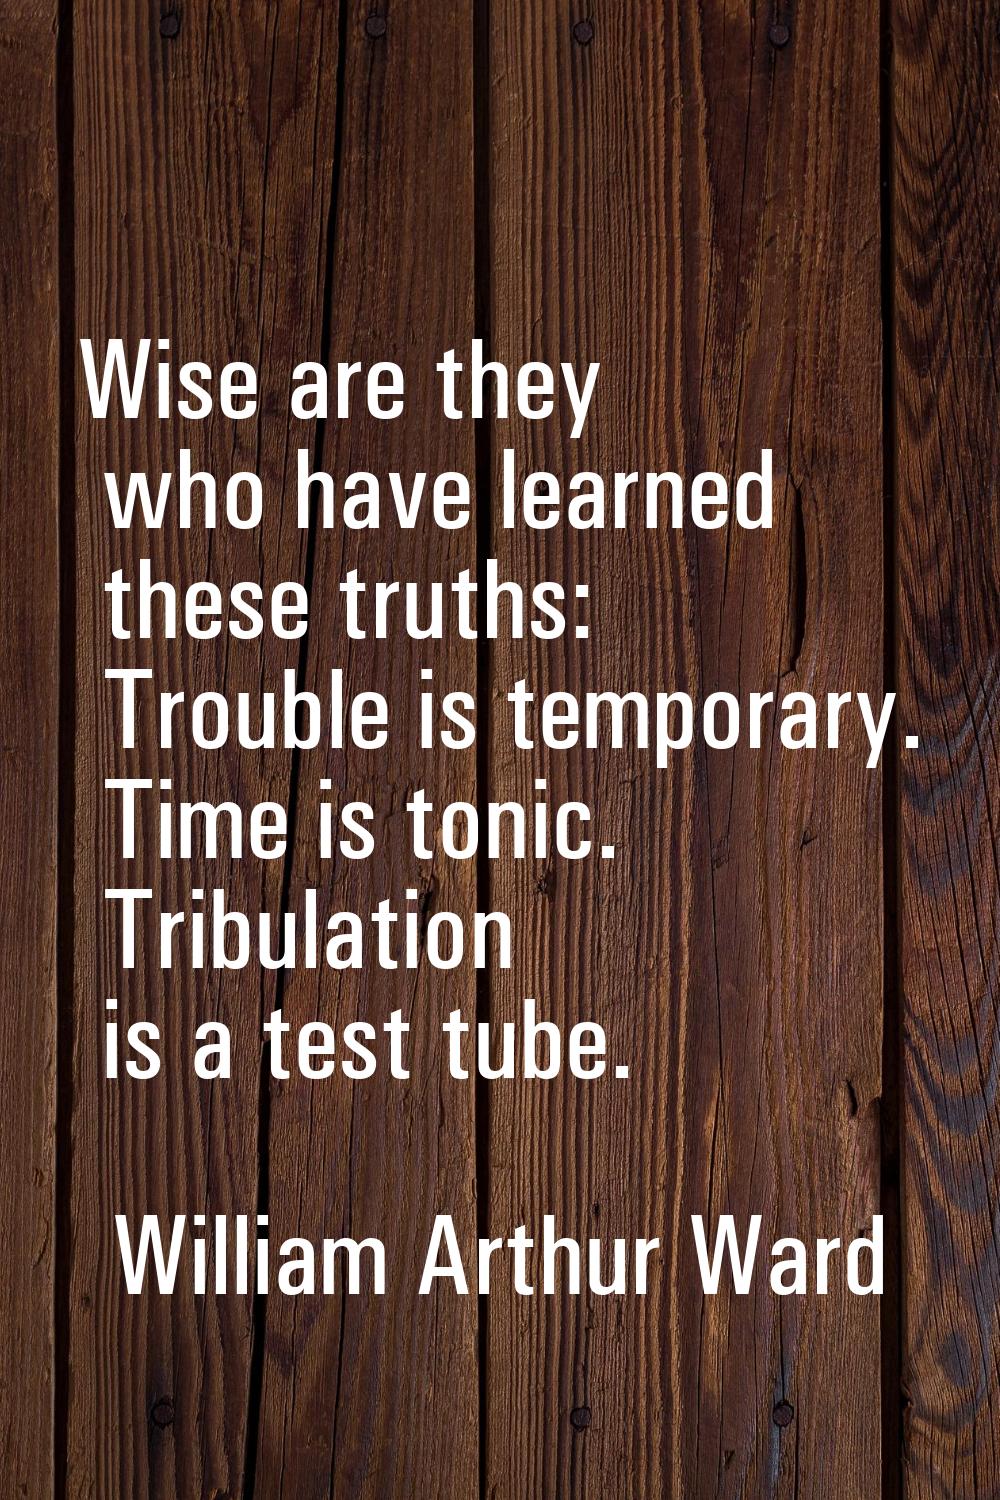 Wise are they who have learned these truths: Trouble is temporary. Time is tonic. Tribulation is a 